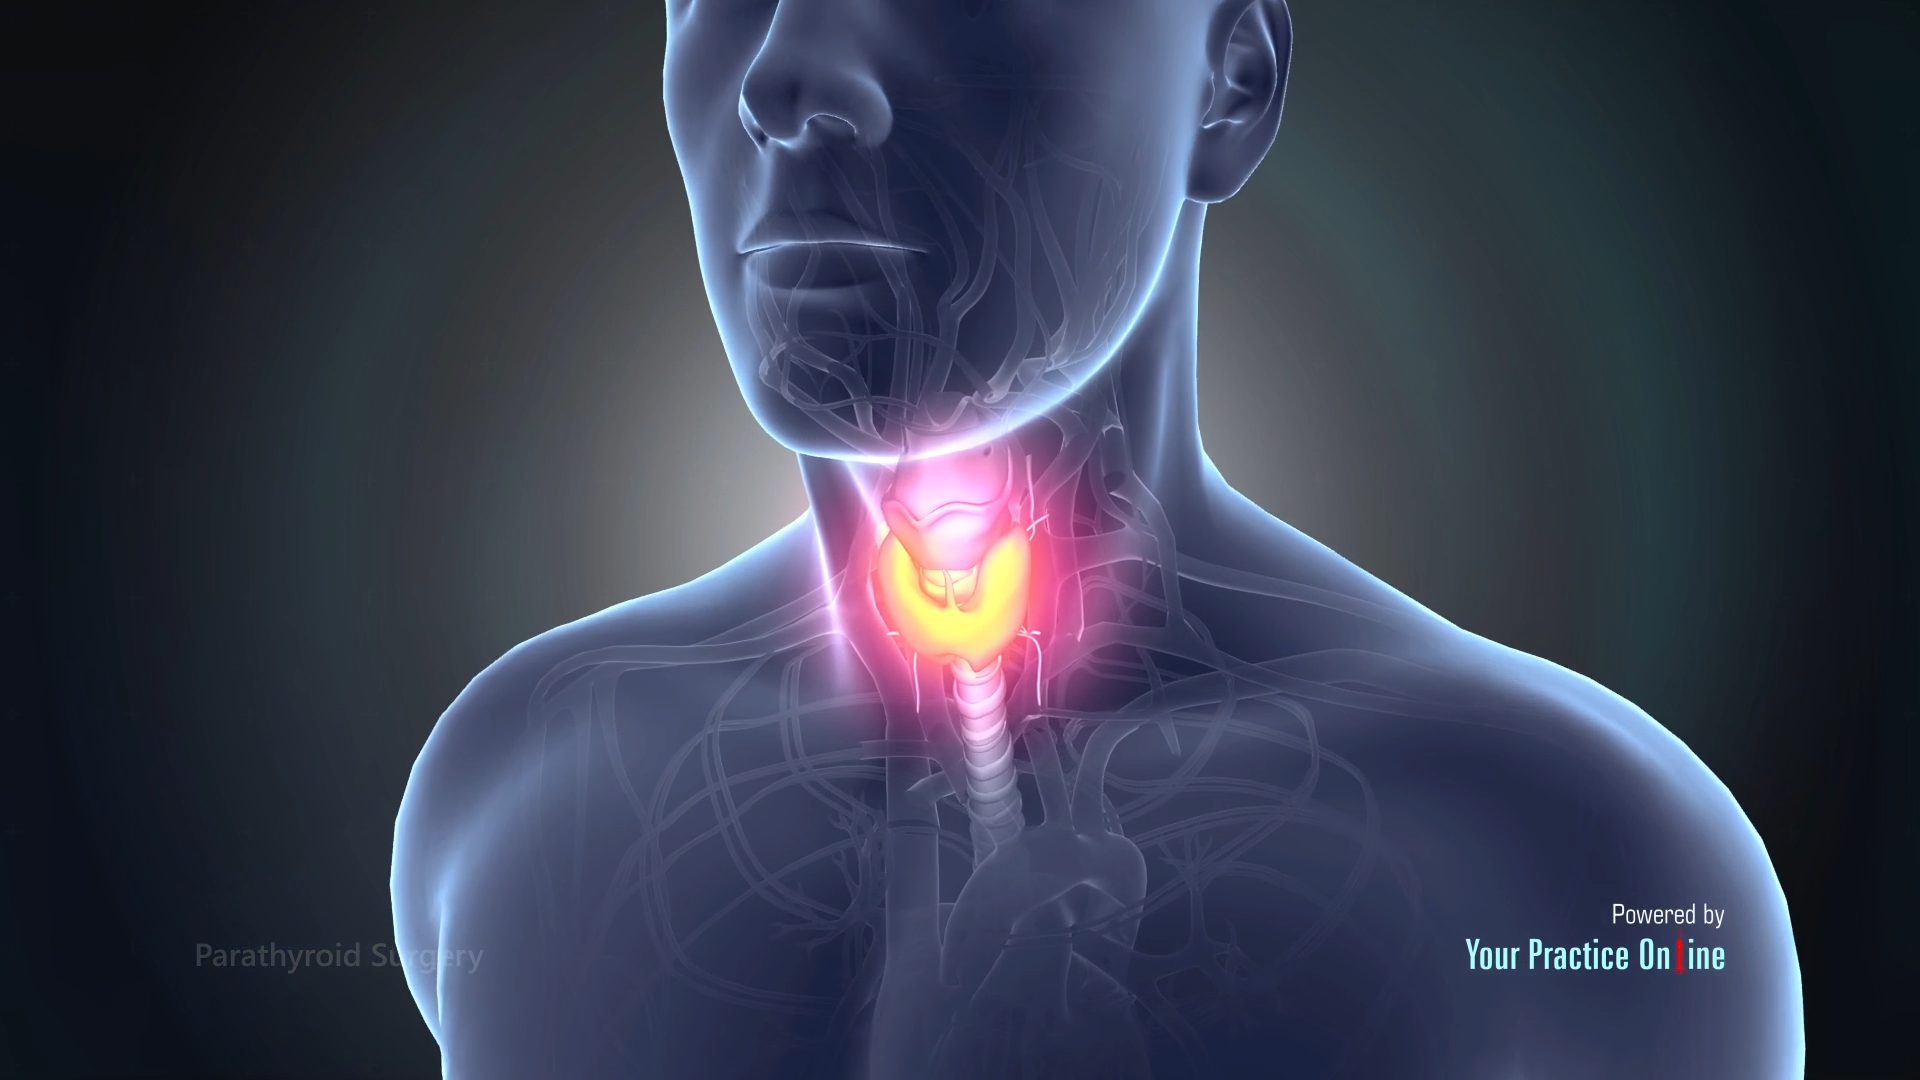 Which organs are affected by the parathyroid hormone?